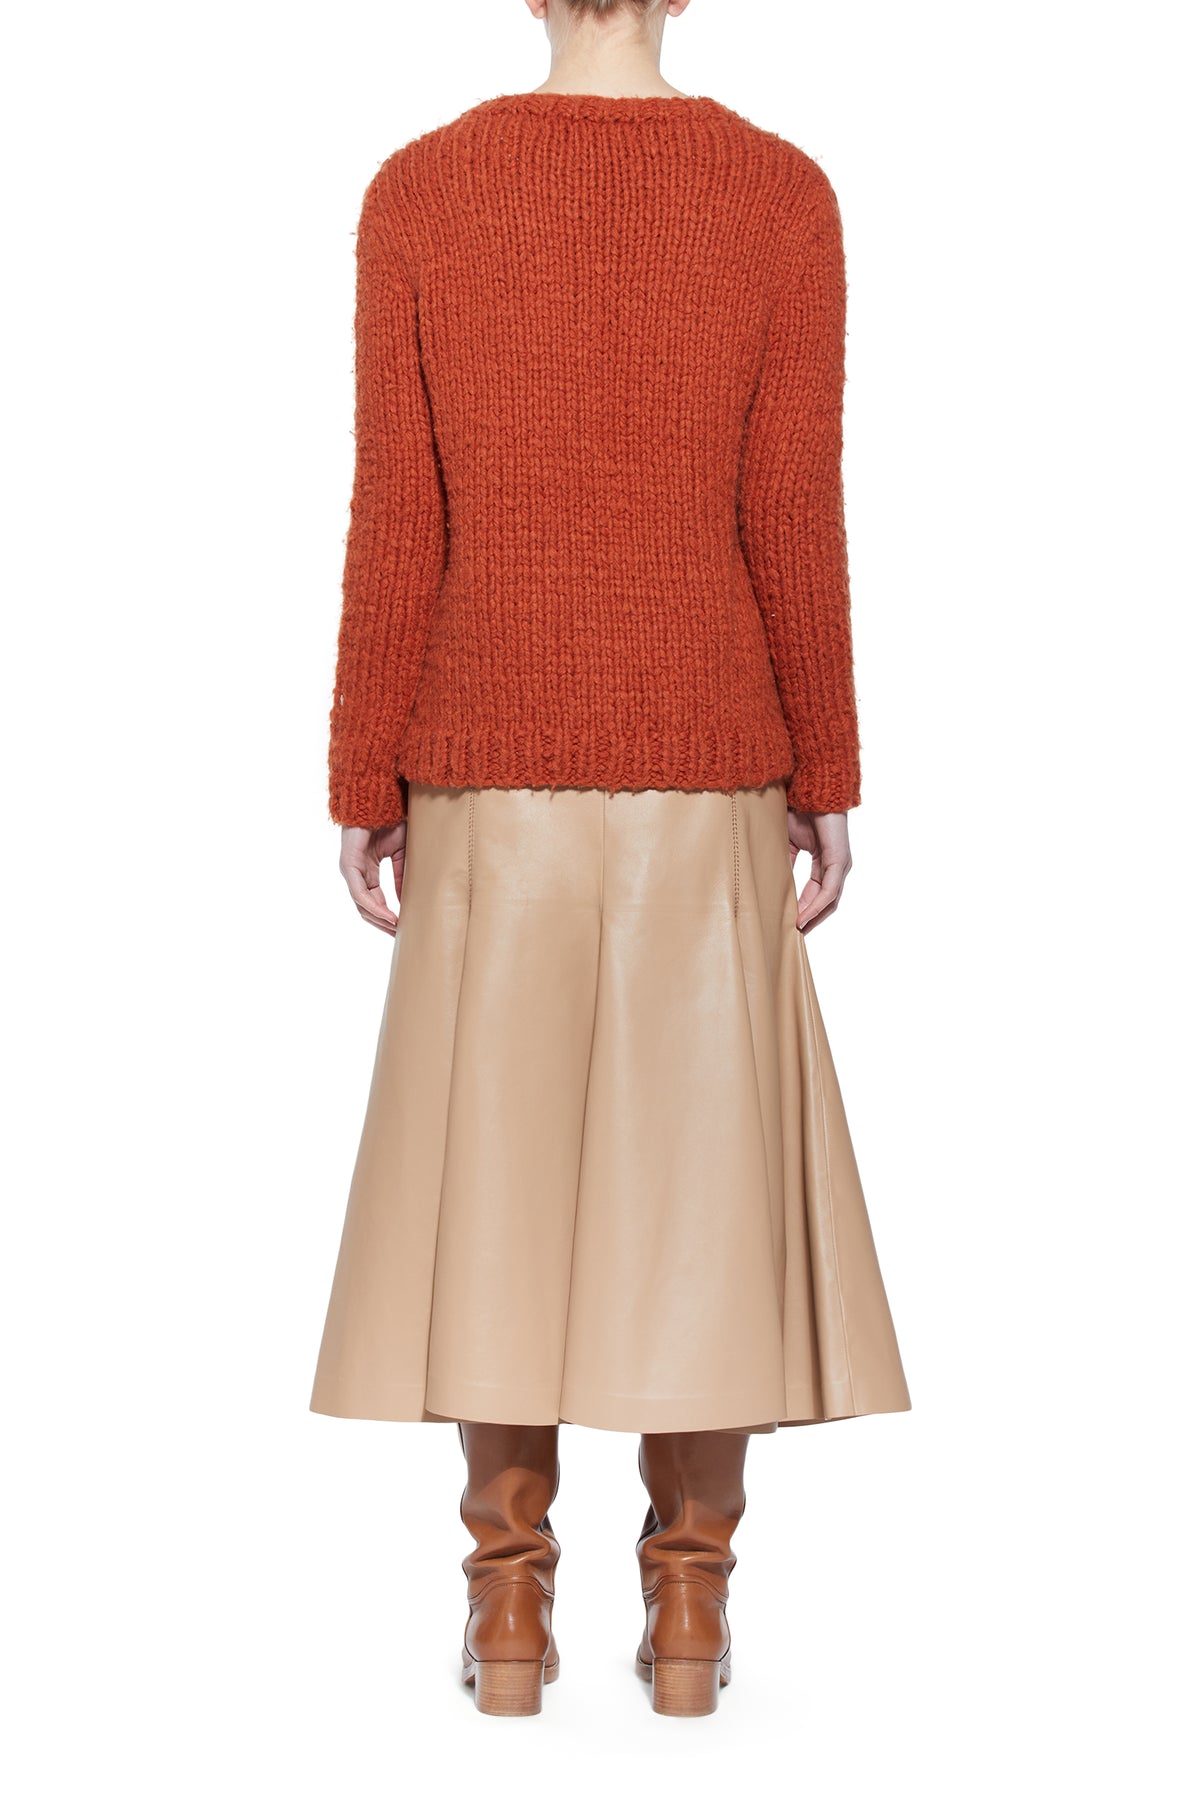 Lawrence Knit Sweater in Copper Welfat Cashmere